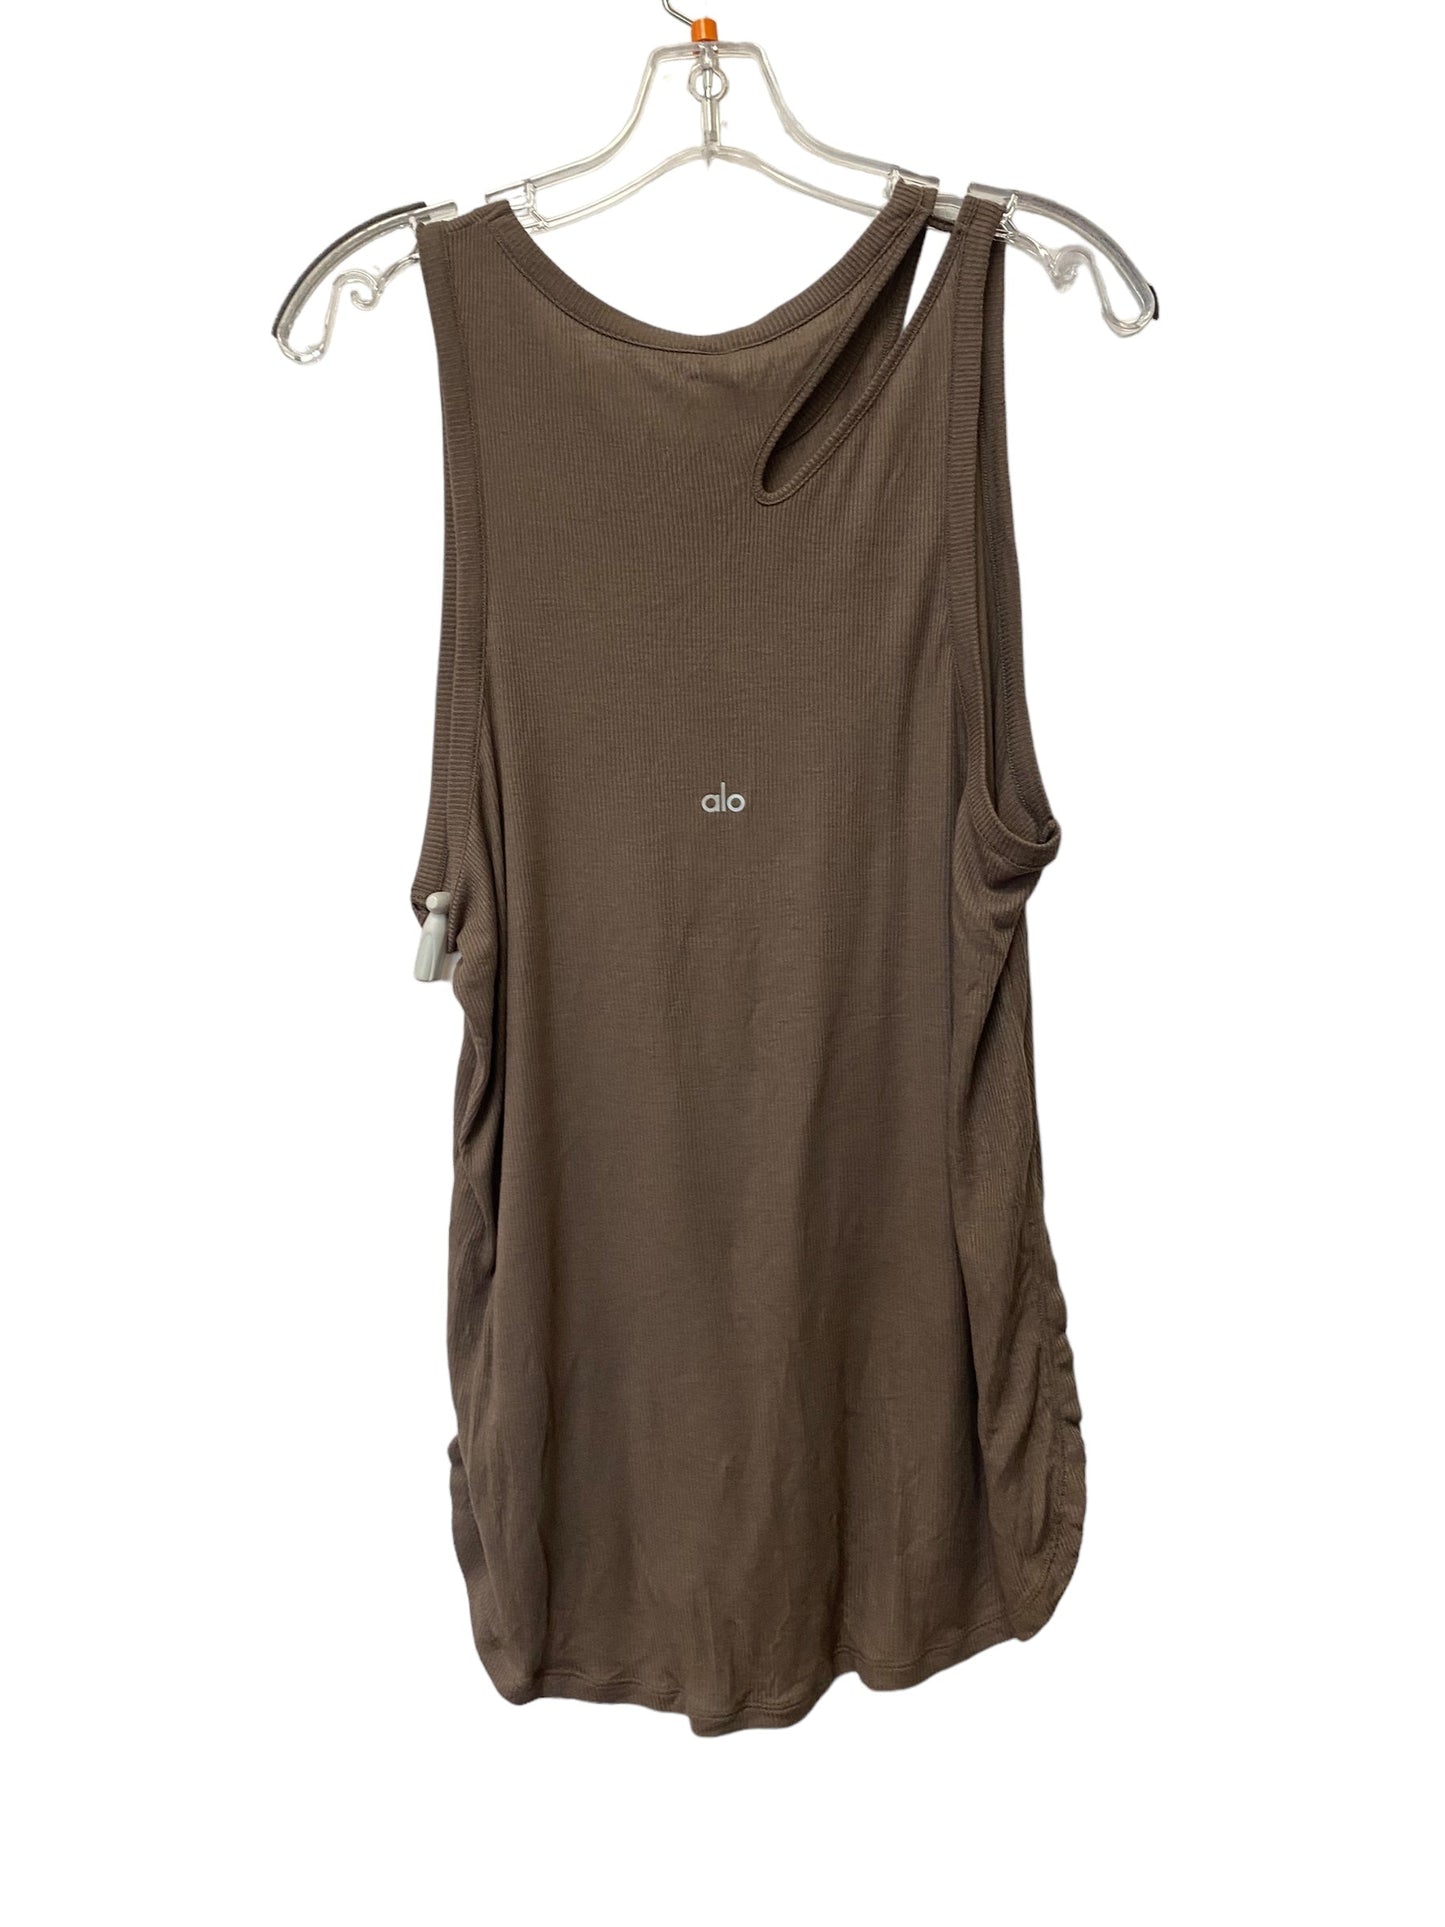 Brown Athletic Tank Top Alo, Size L